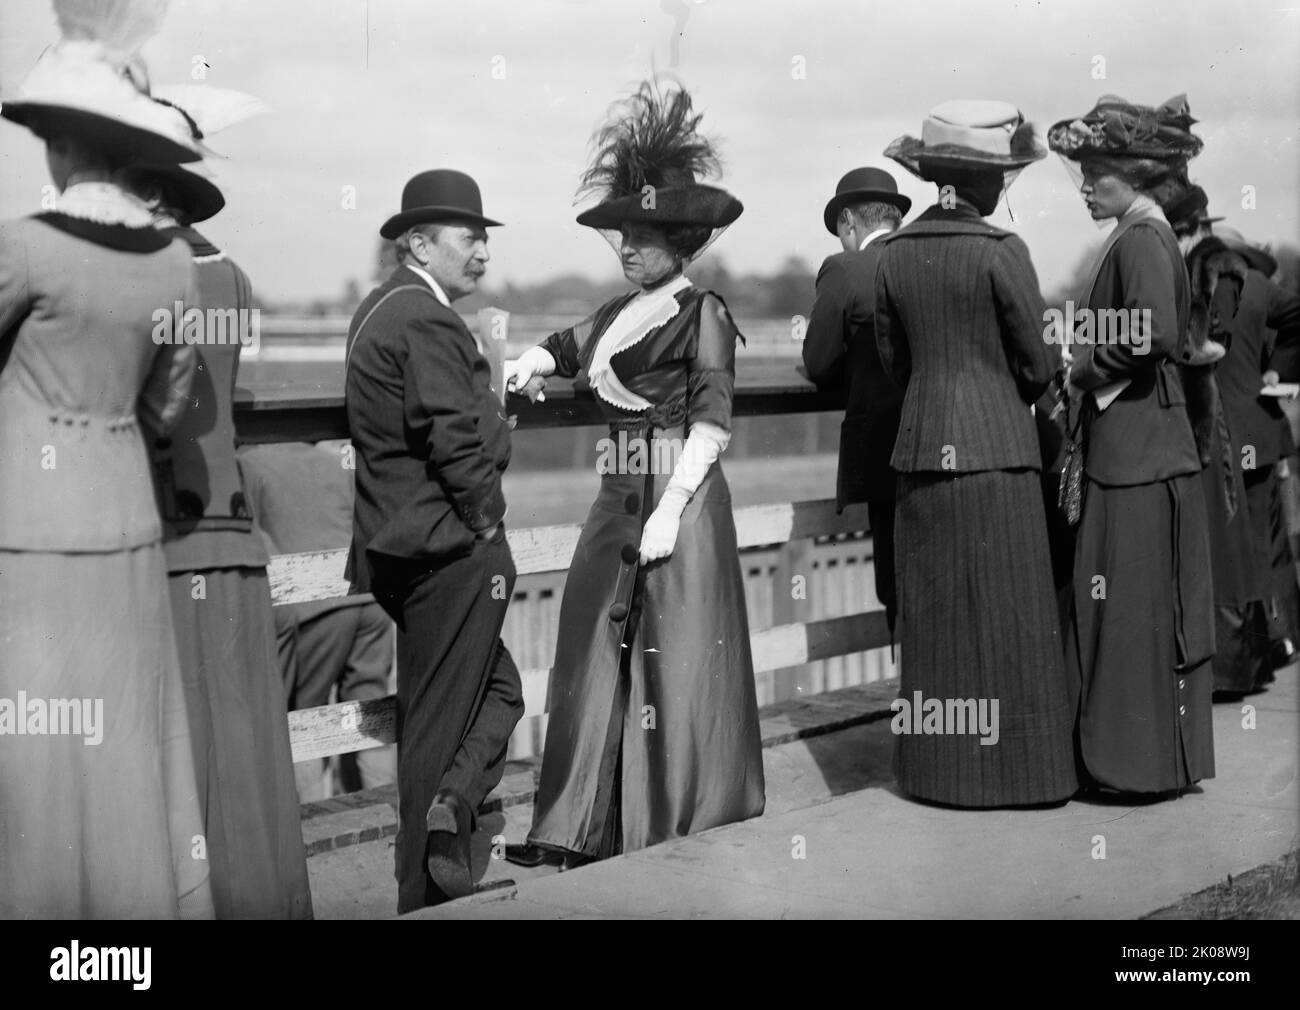 Benning Races - August Belmont And Mrs. Donald Cameron, 1912. [Benning Race Track in Washington, D.C. opened in 1890. Businessman and financier August Belmont; Elizabeth Sherman, wife of James Donald Cameron?]. Stock Photo